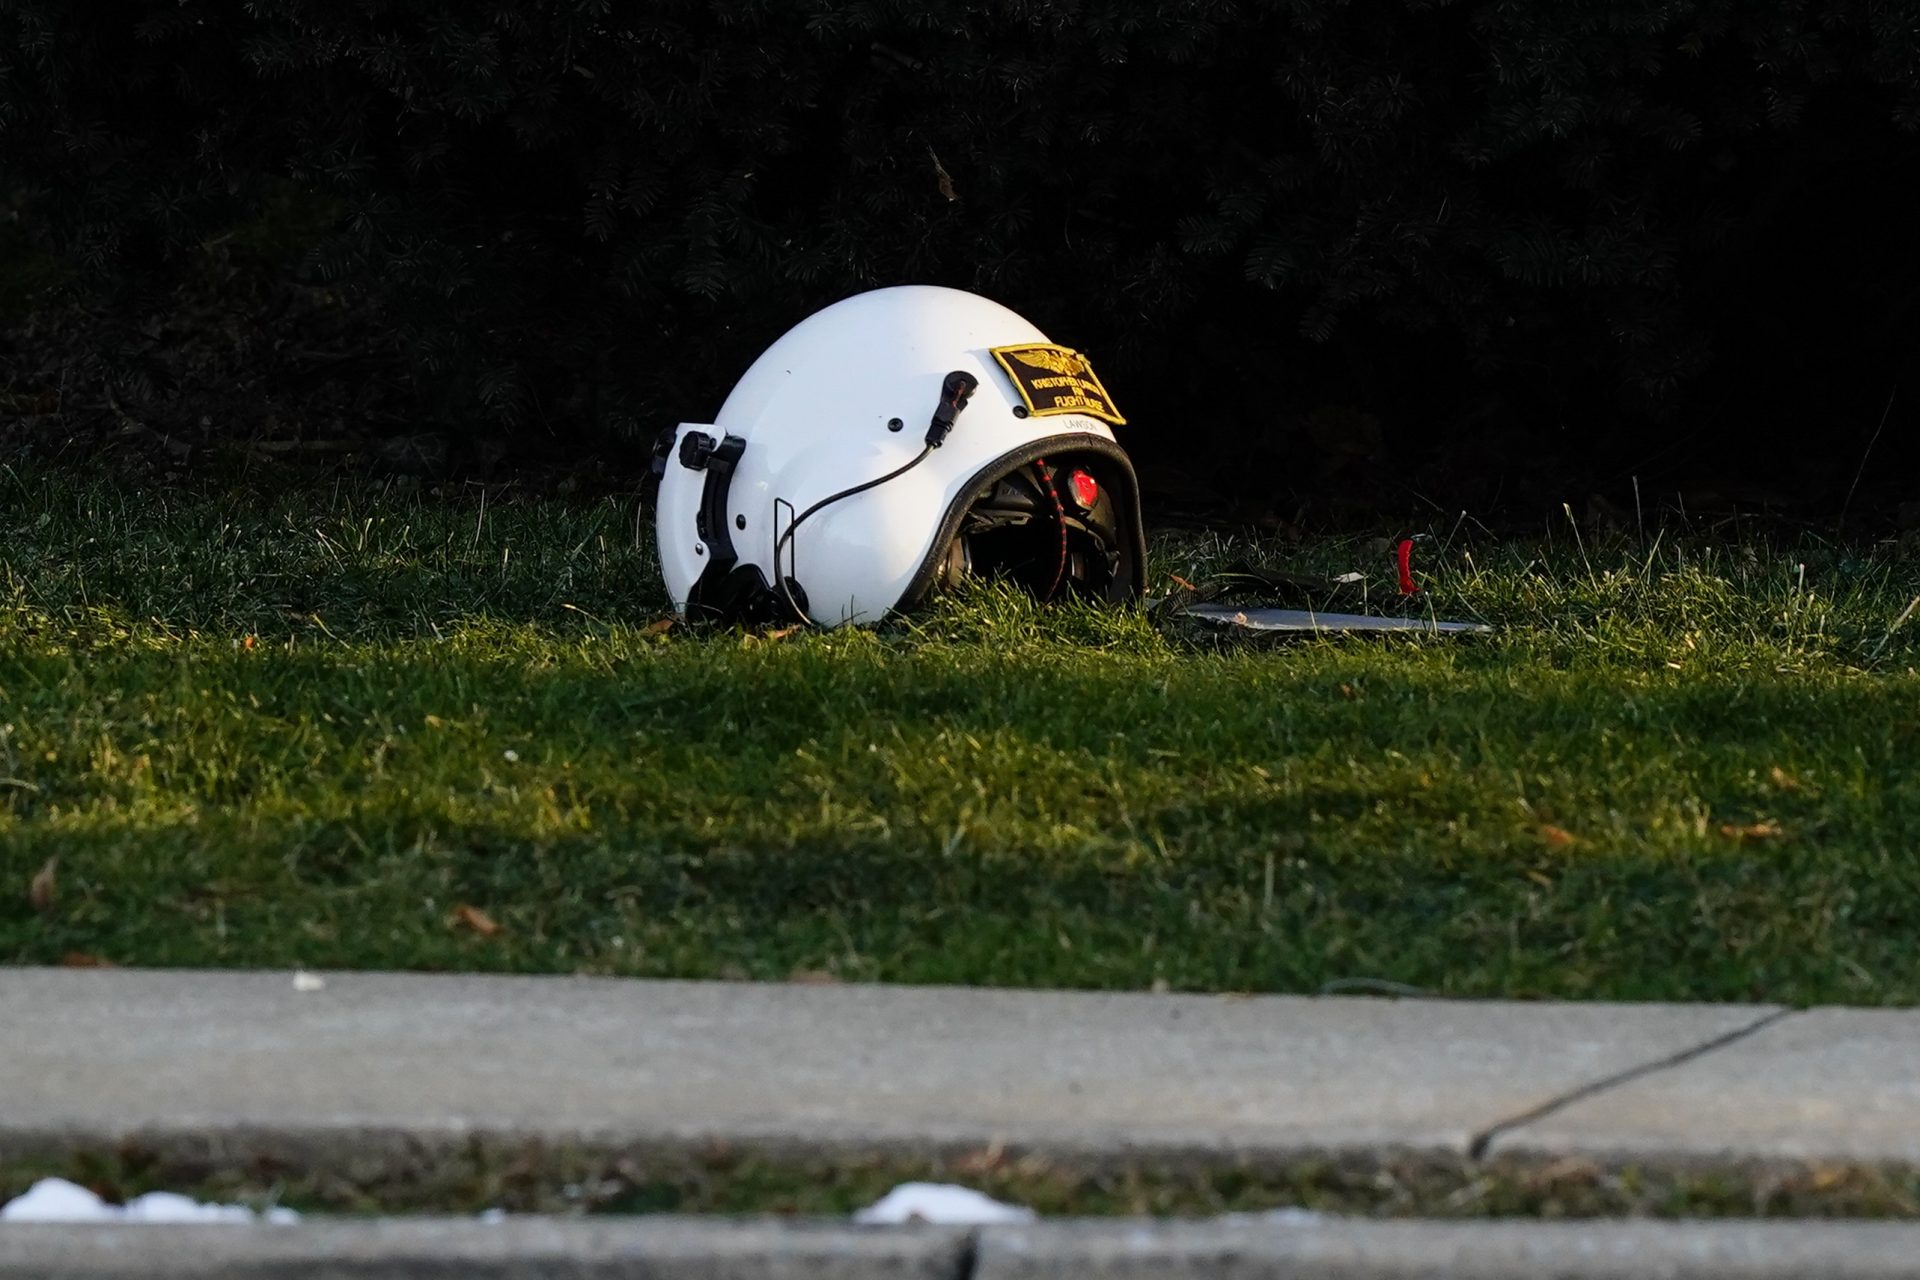 A helmet sits on the ground near the scene of a crashed medical helicopter in the Drexel Hill section of Upper Darby, Pa., on Tuesday, Jan. 11, 2022.